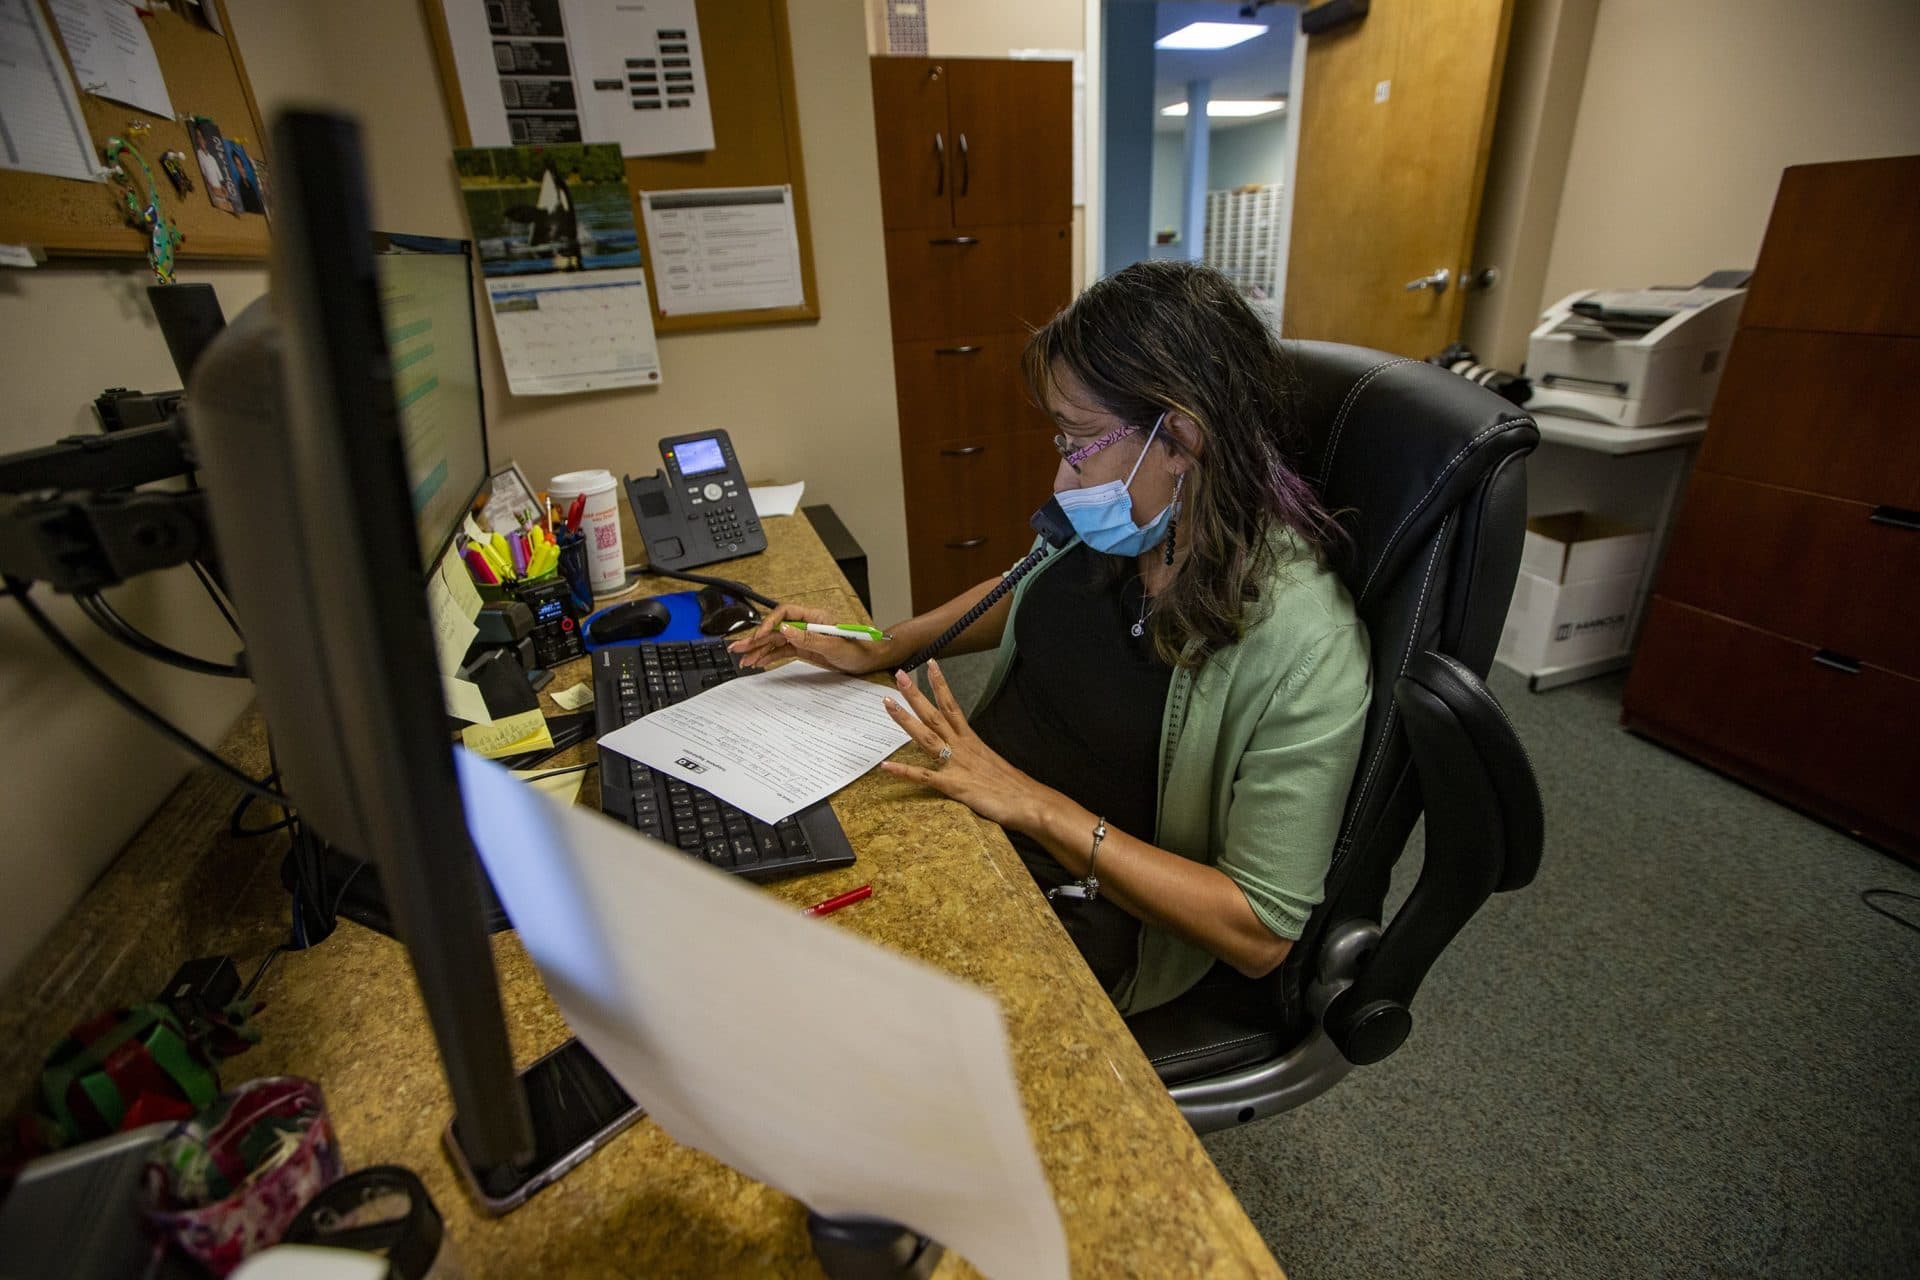 Administrative assistant Myrna Siler takes a call to request an appointment at the Outpatient Behavioral Health and Family Support Services office in Springfield. (Jesse Costa/WBUR)